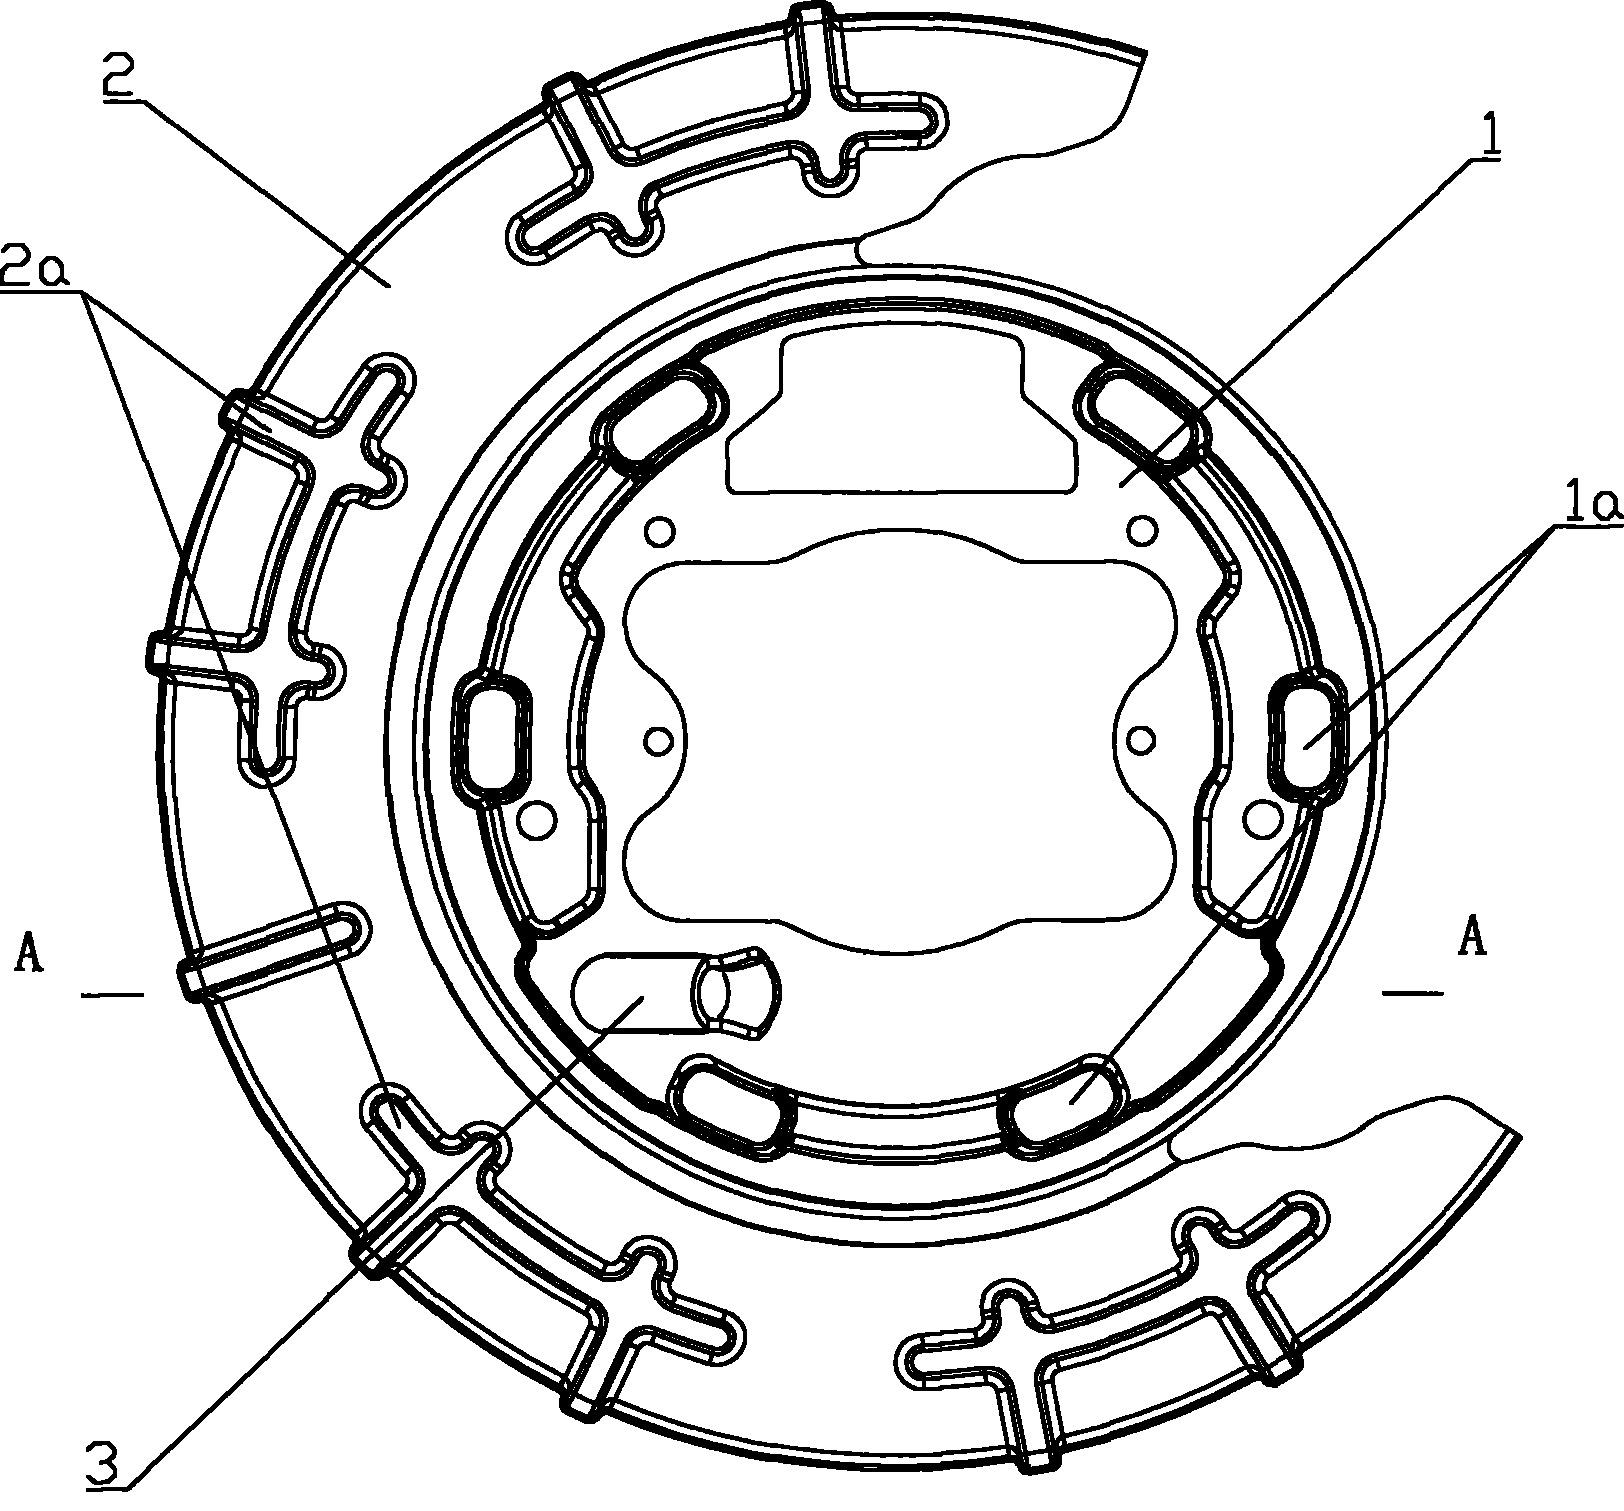 Parking baseplate assembly of drum-in-disc type parking brake